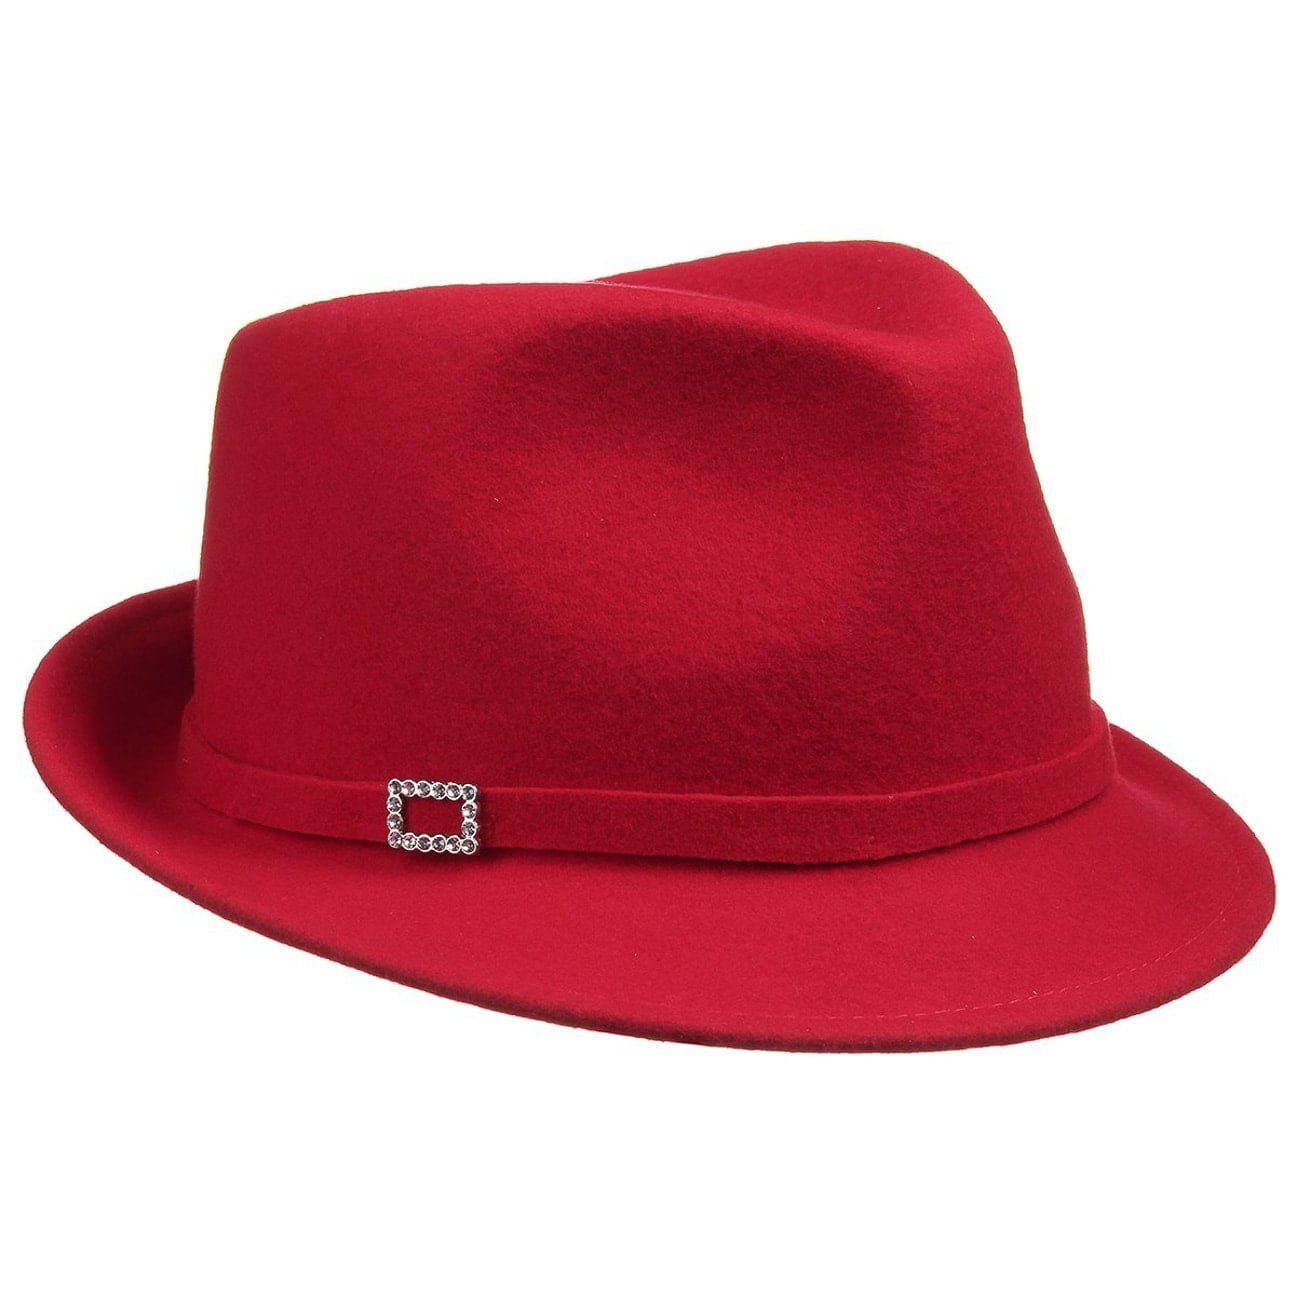 Lipodo Trilby (1-St) Damentrilby, Made in Italy rot